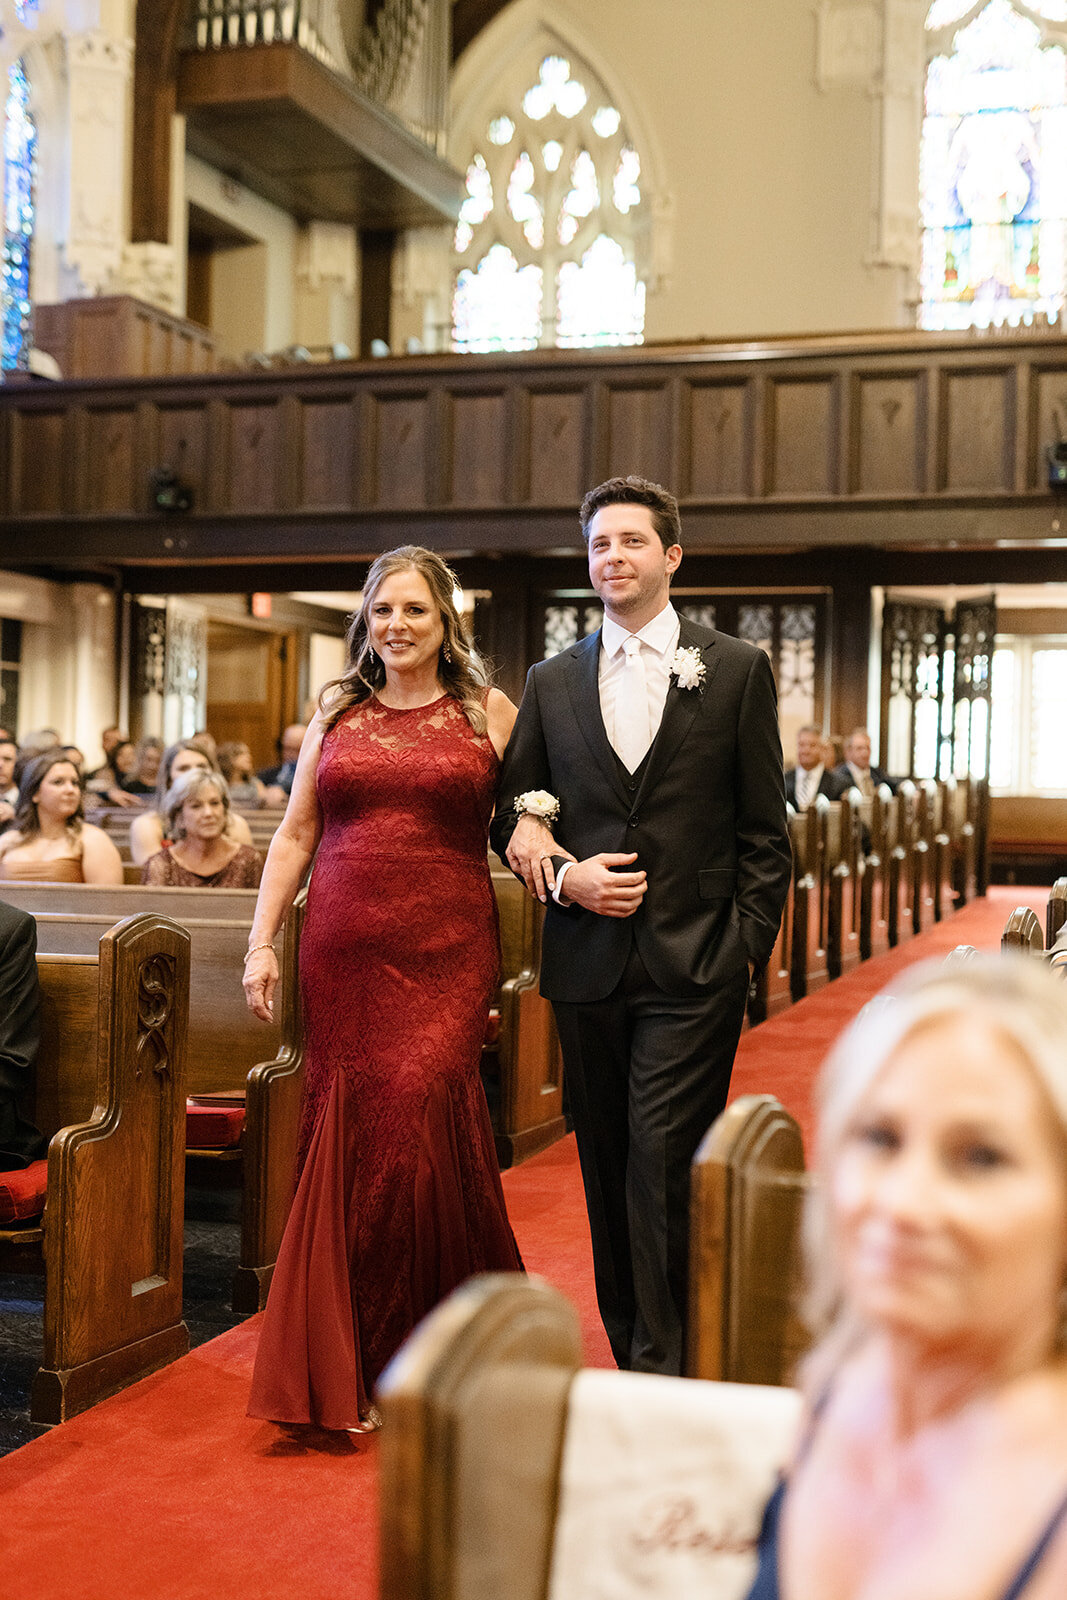 Kylie and Jack at The Grand Hall - Kansas City Wedding Photograpy - Nick and Lexie Photo Film-583